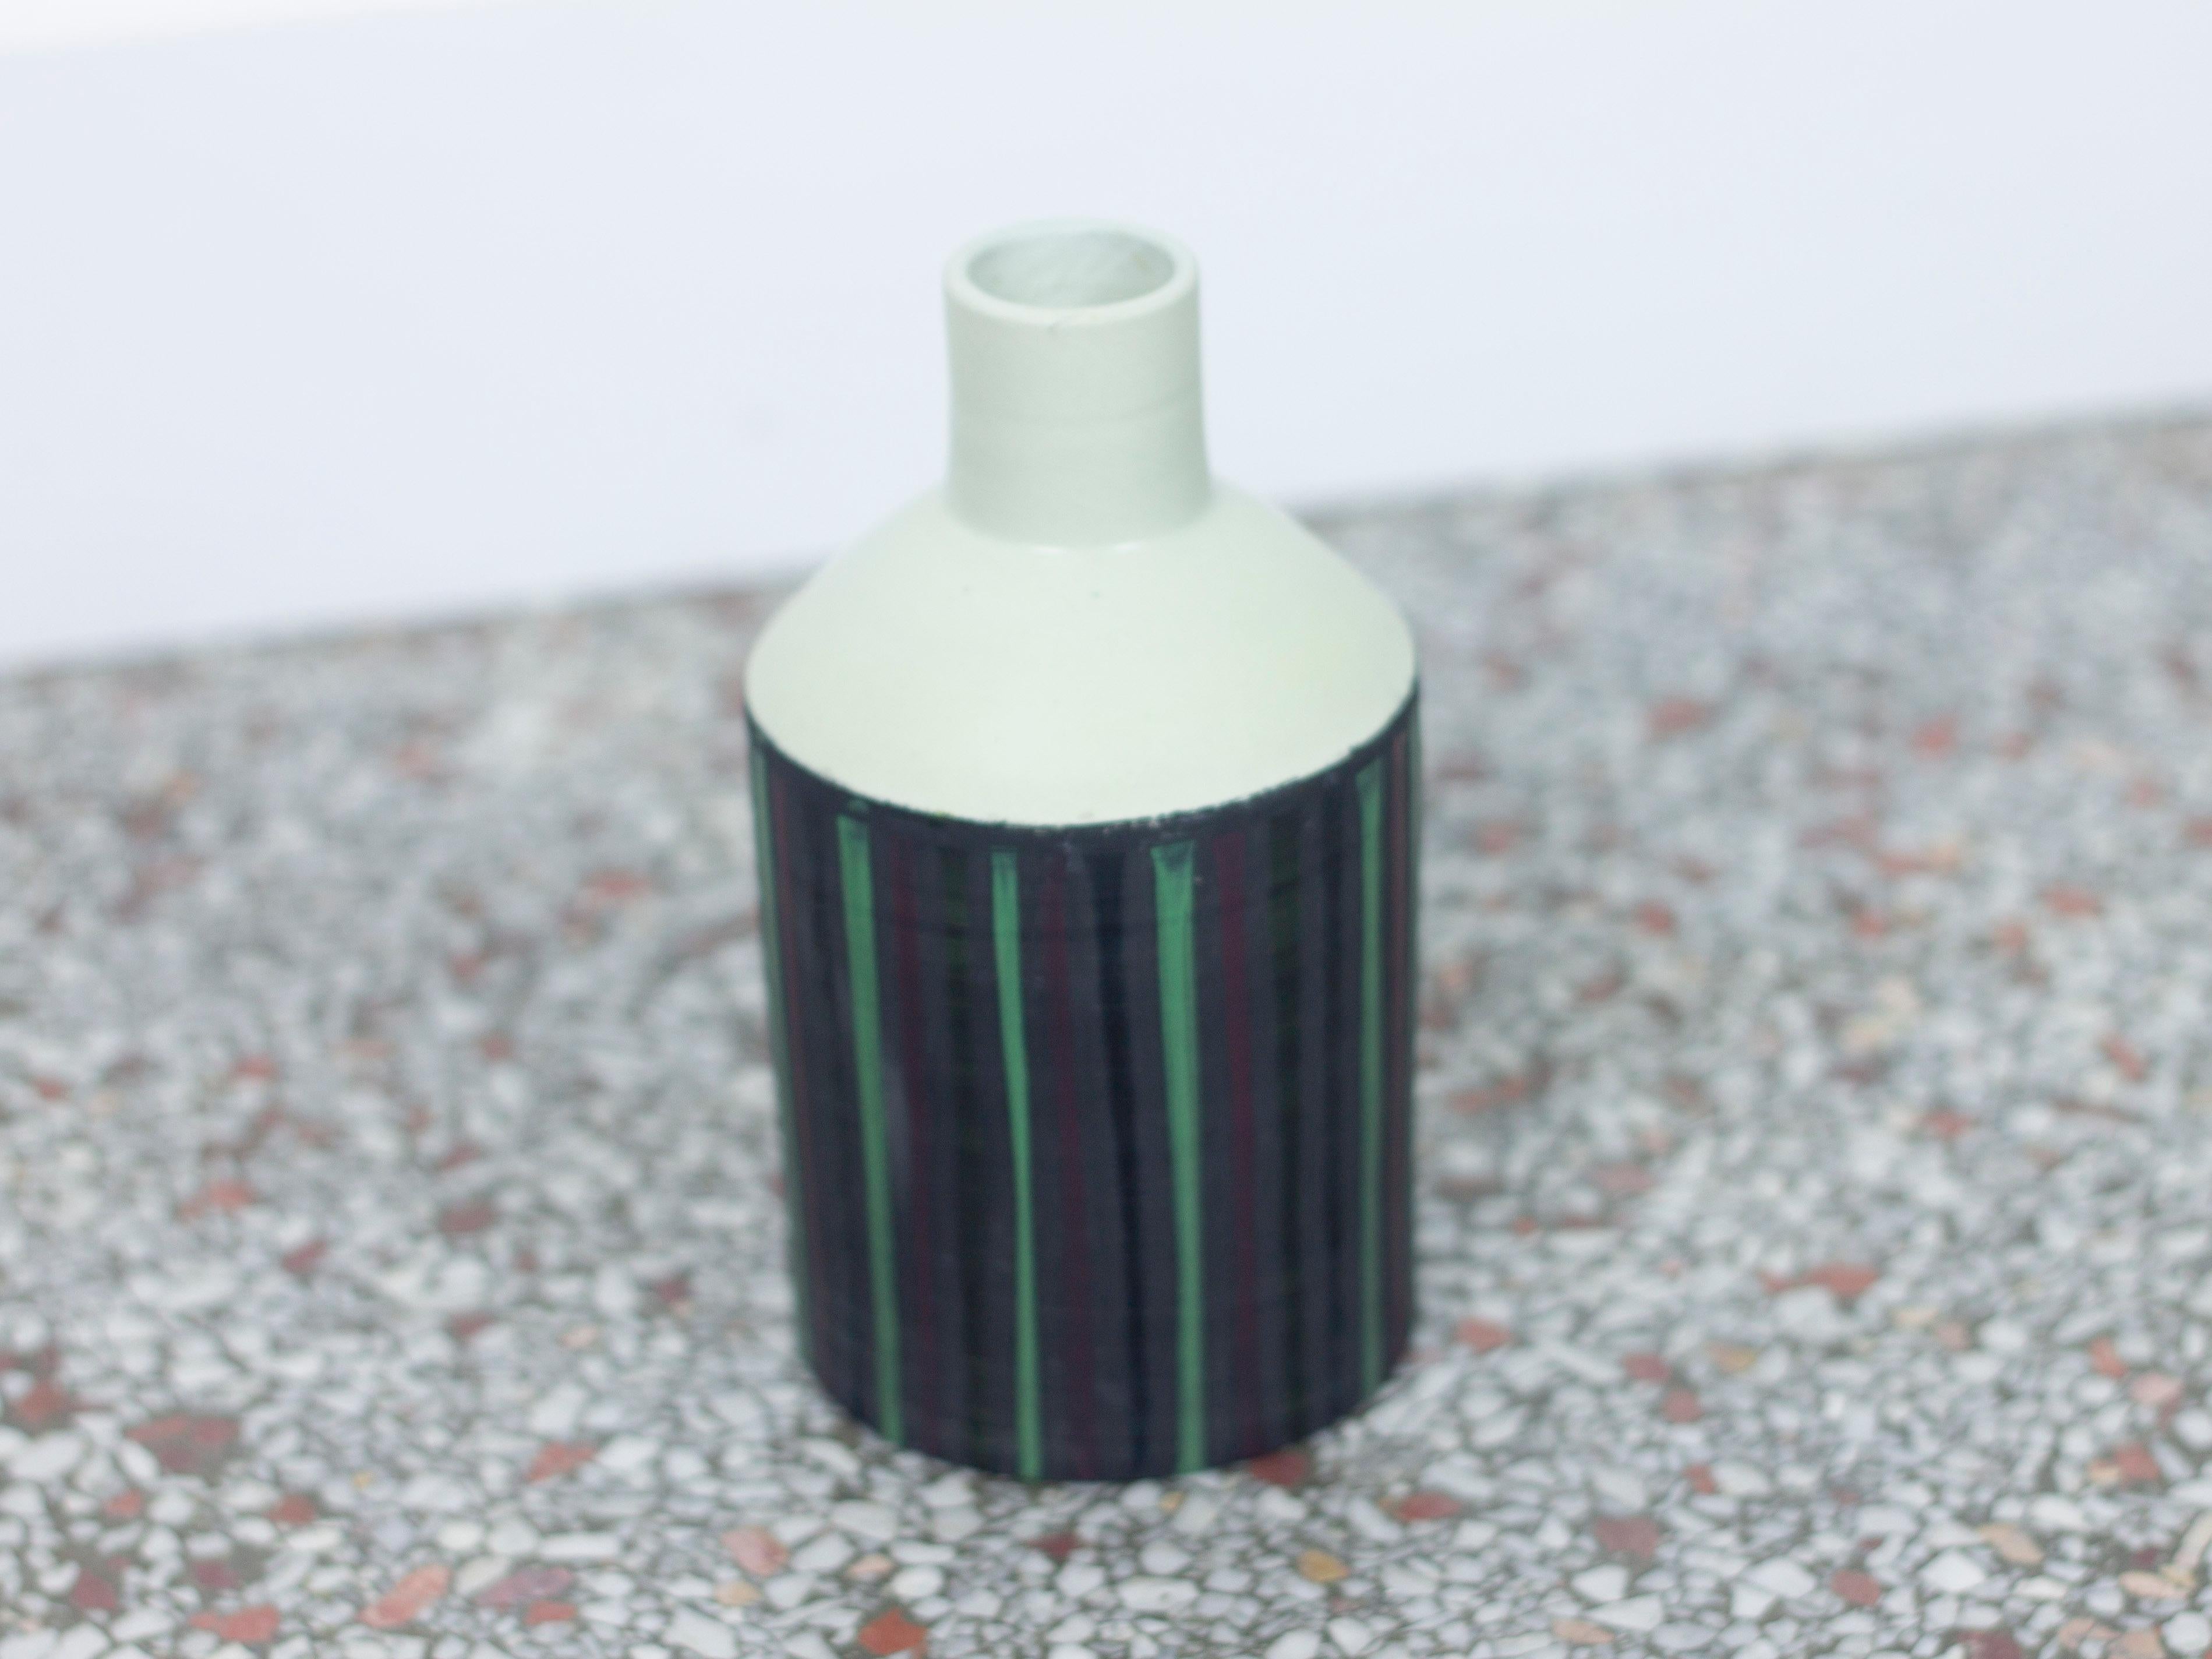 A small ceramic vase or bottle with green and purple pinstripe glaze designed by Ettore Sottsass for Bitossi. Aquired from the Miami estate of a former Easter Airlines pilot. Signed 